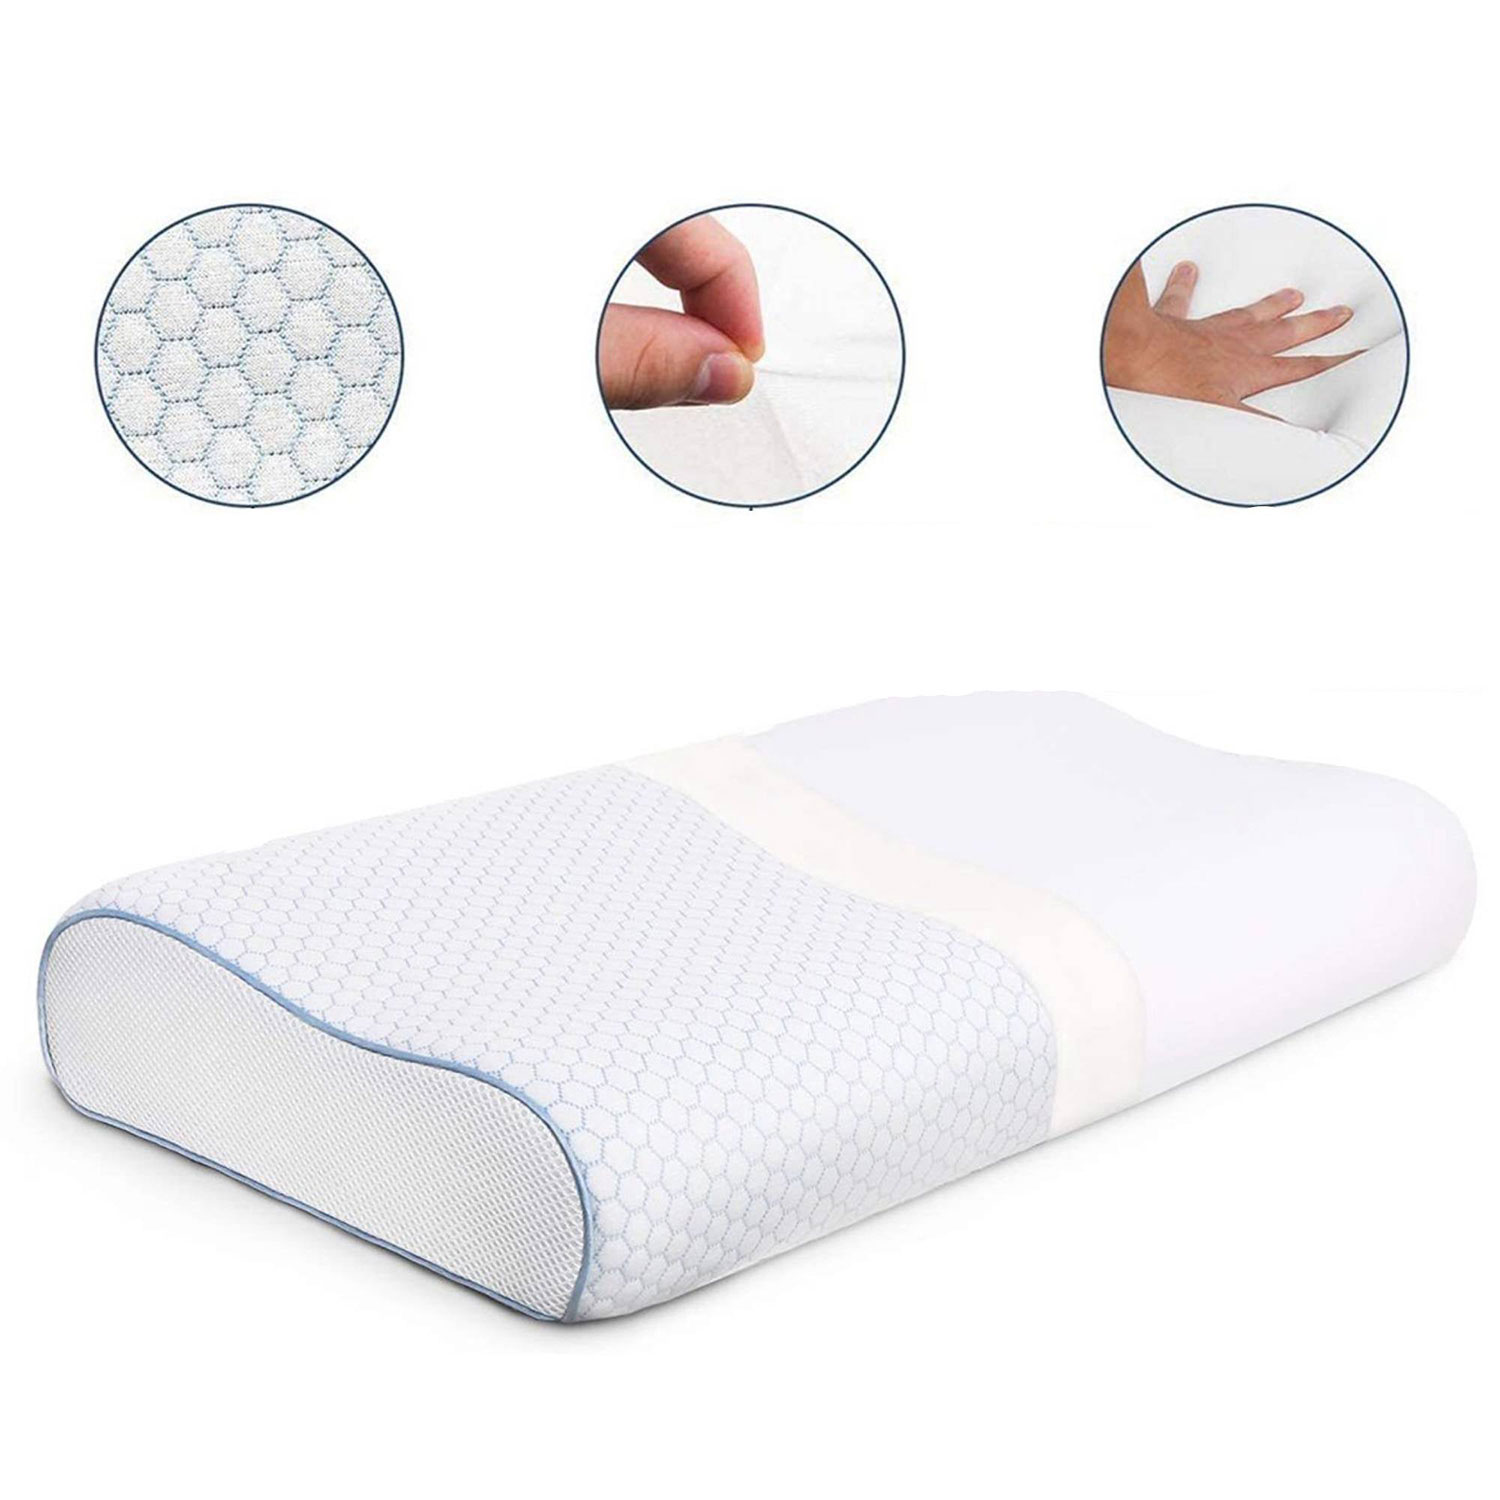 Sepoveda Memory Foam Pillow By Doctor Pillow